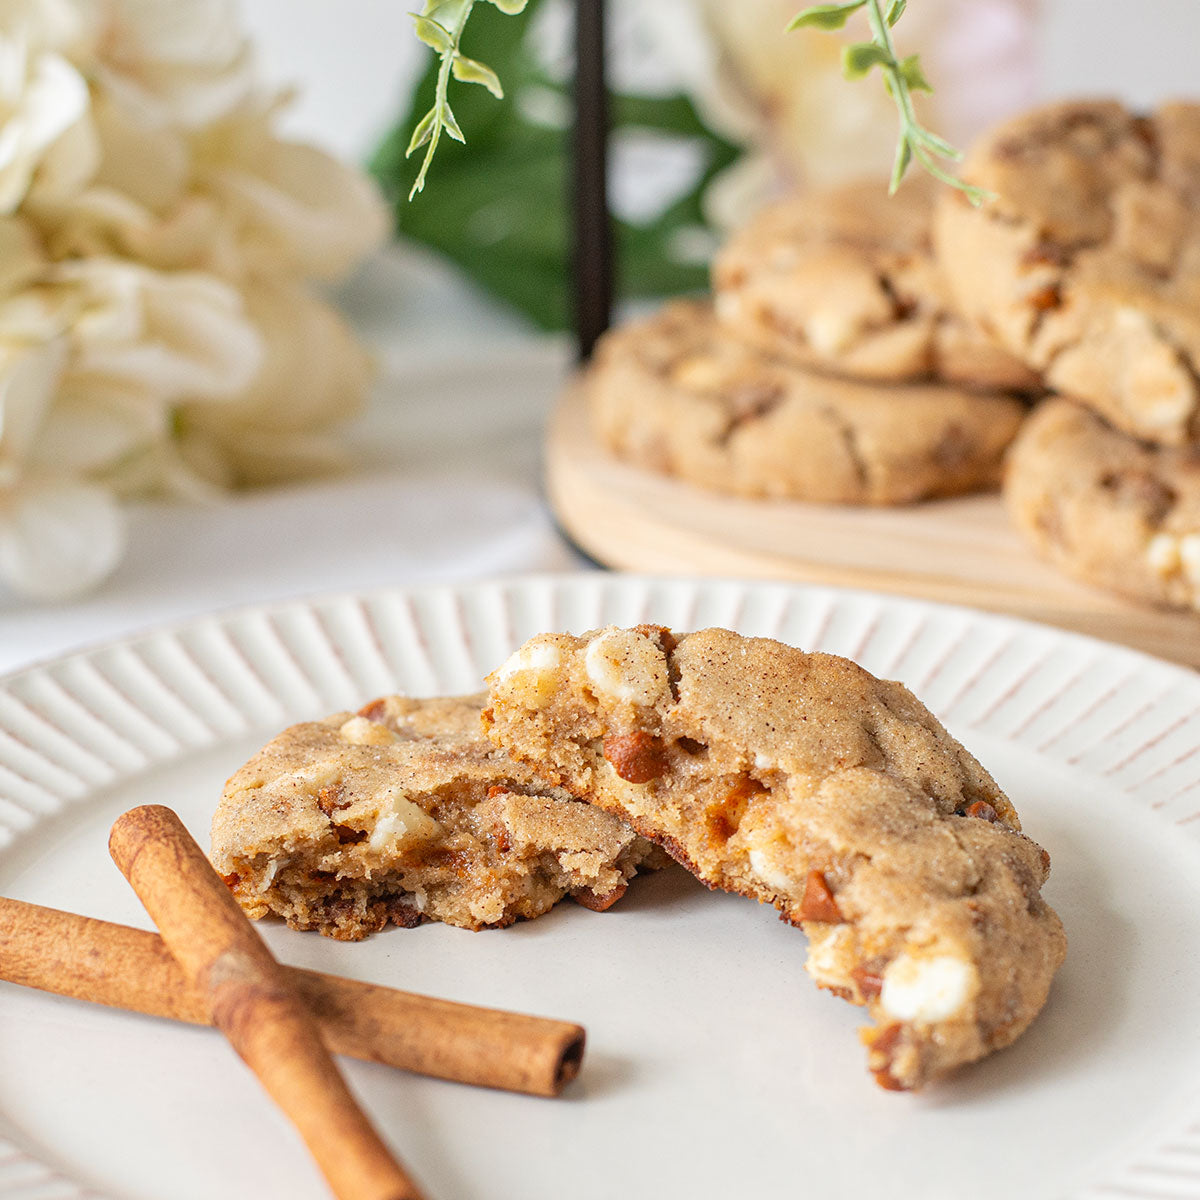 A delicious assortment of Cinnamon Lovers Cookies, showcasing their mouthwatering combination of cinnamon-infused dough, cinnamon chips, and white chocolate chips.